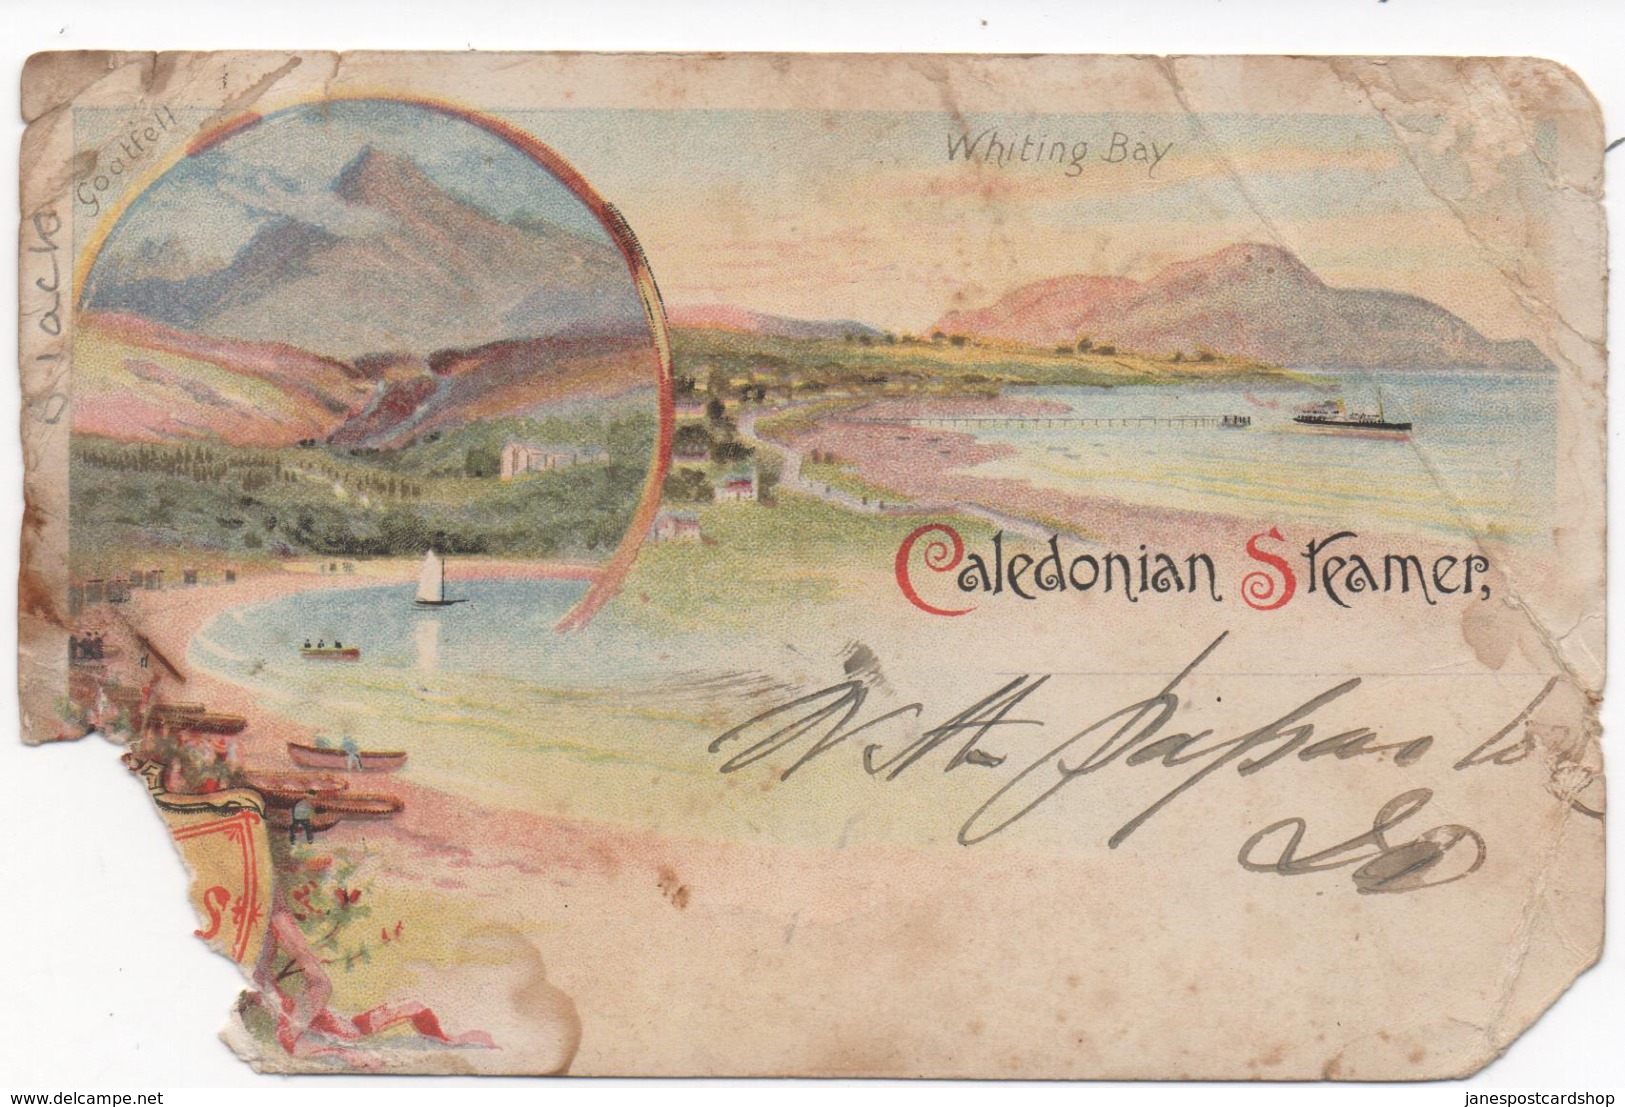 VERY DAMAGED ADVERTISING CARD FOR CALEDONIAN ROUTES - SCOTTISH STEAMERS - GOUROCK AREA 1902 - Renfrewshire